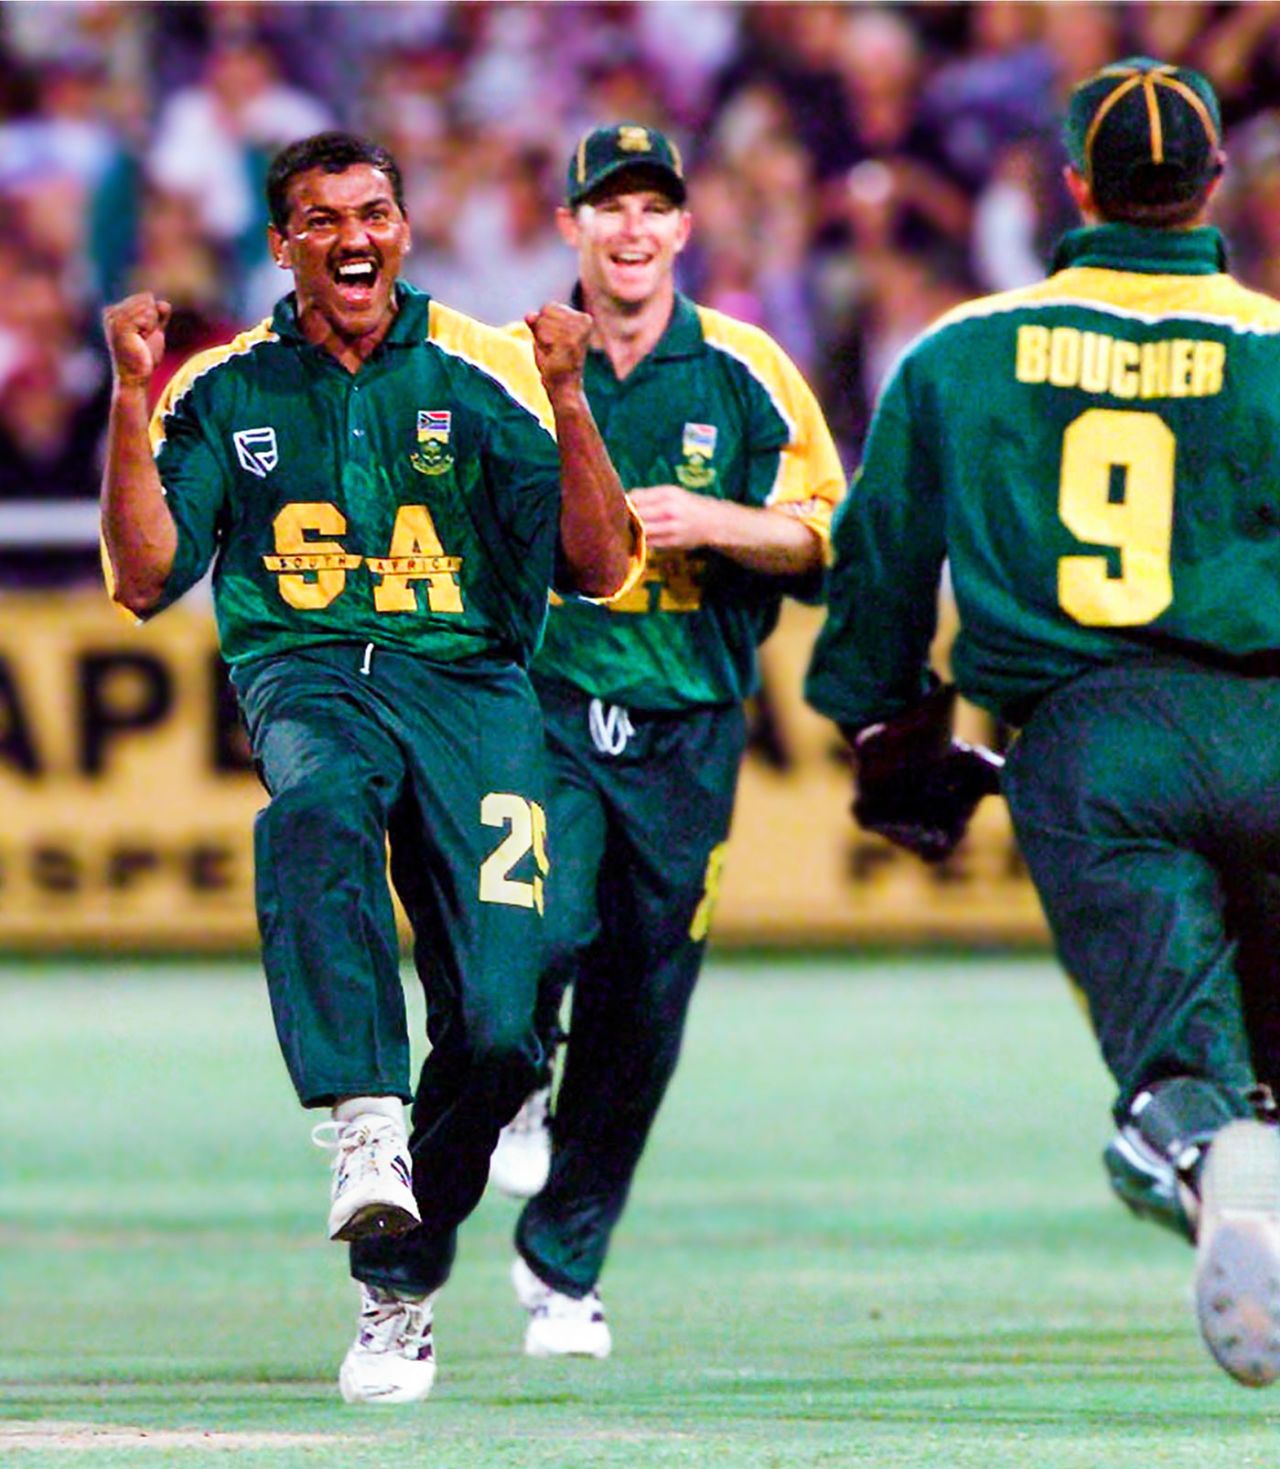 Henry Williams celebrates a wicket, South Africa v England, 2nd ODI, Cape Town, January 26, 2000